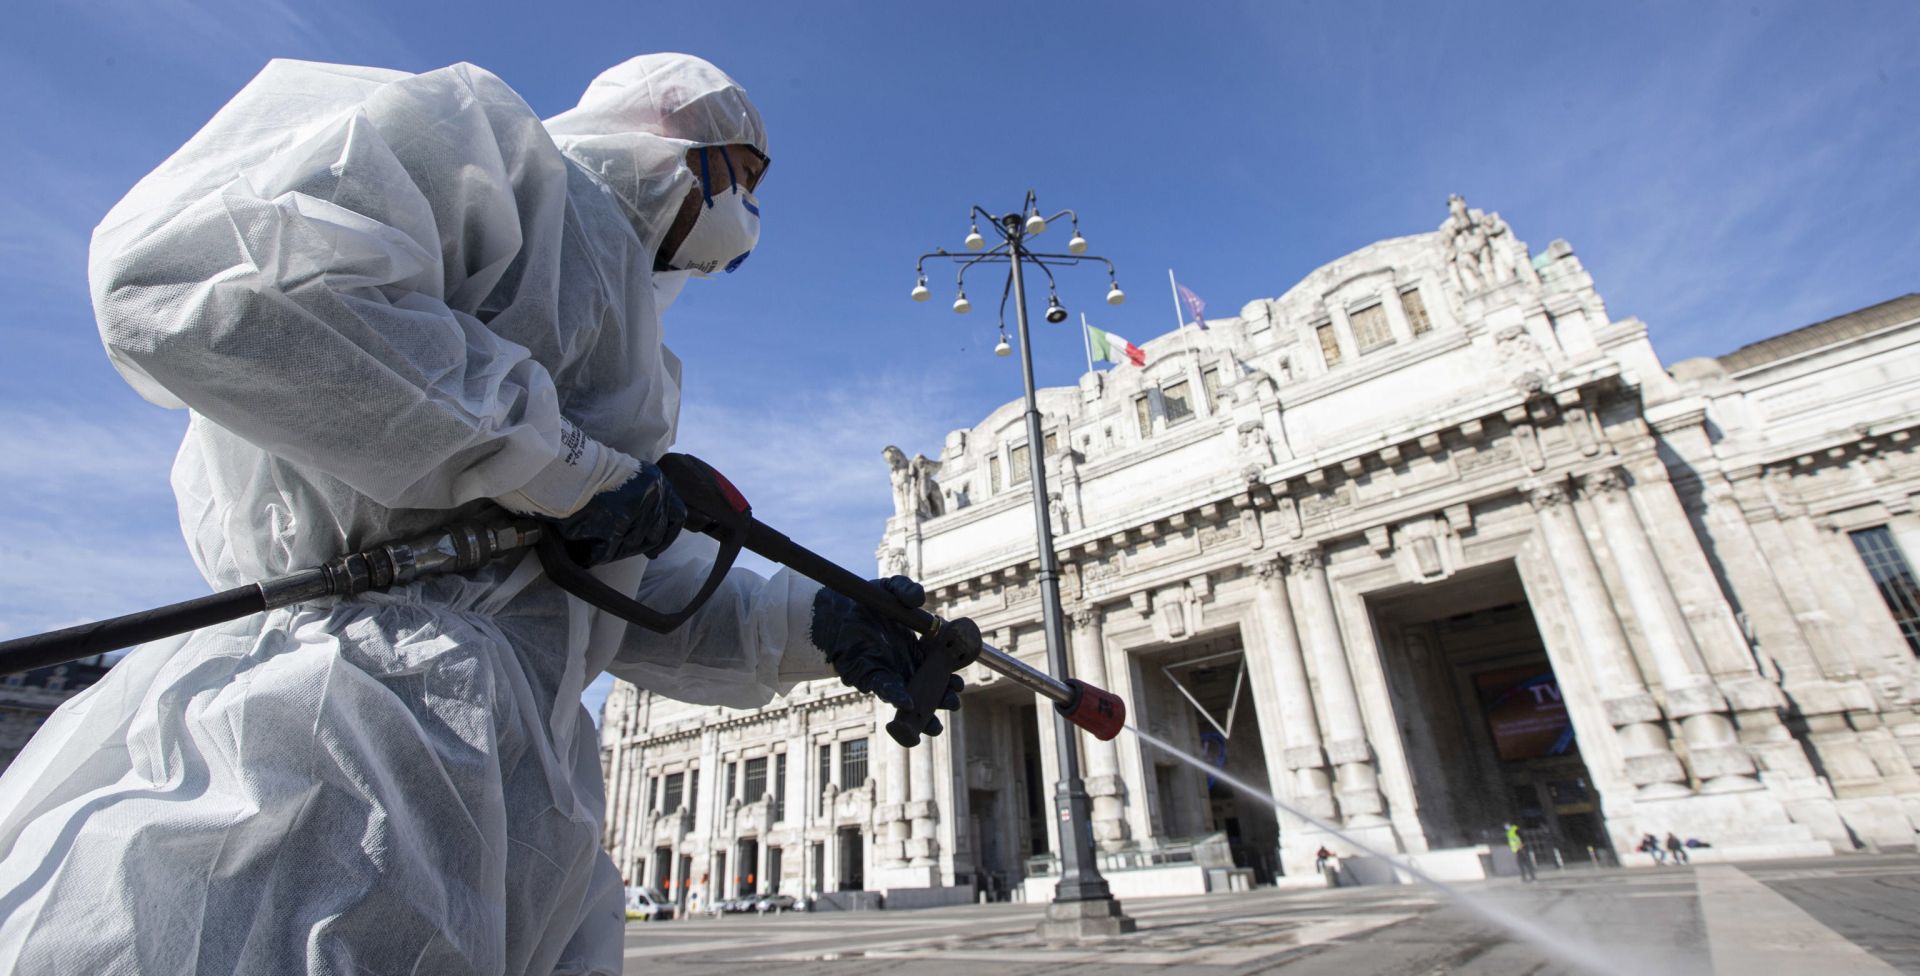 epa08292751 Operators of the Milanese Environmental Services Company (AMSA) wearing white protective overalls, protective masks and glasses sanitize the square of the Central Station using a disinfectant diluted water to avoid further spread of the COVID-19 virus 13 Mach 2020. Tough lockdown measures kicked in throughout Italy on 12 March after Prime Minister Giuseppe Conte announced late on 11 March that all non-essential shops should close as part of the efforts to contain the ongoing pandemic of the COVID-19 disease caused by the SARS-CoV-2 coronavirus.  EPA/Marco Ottico